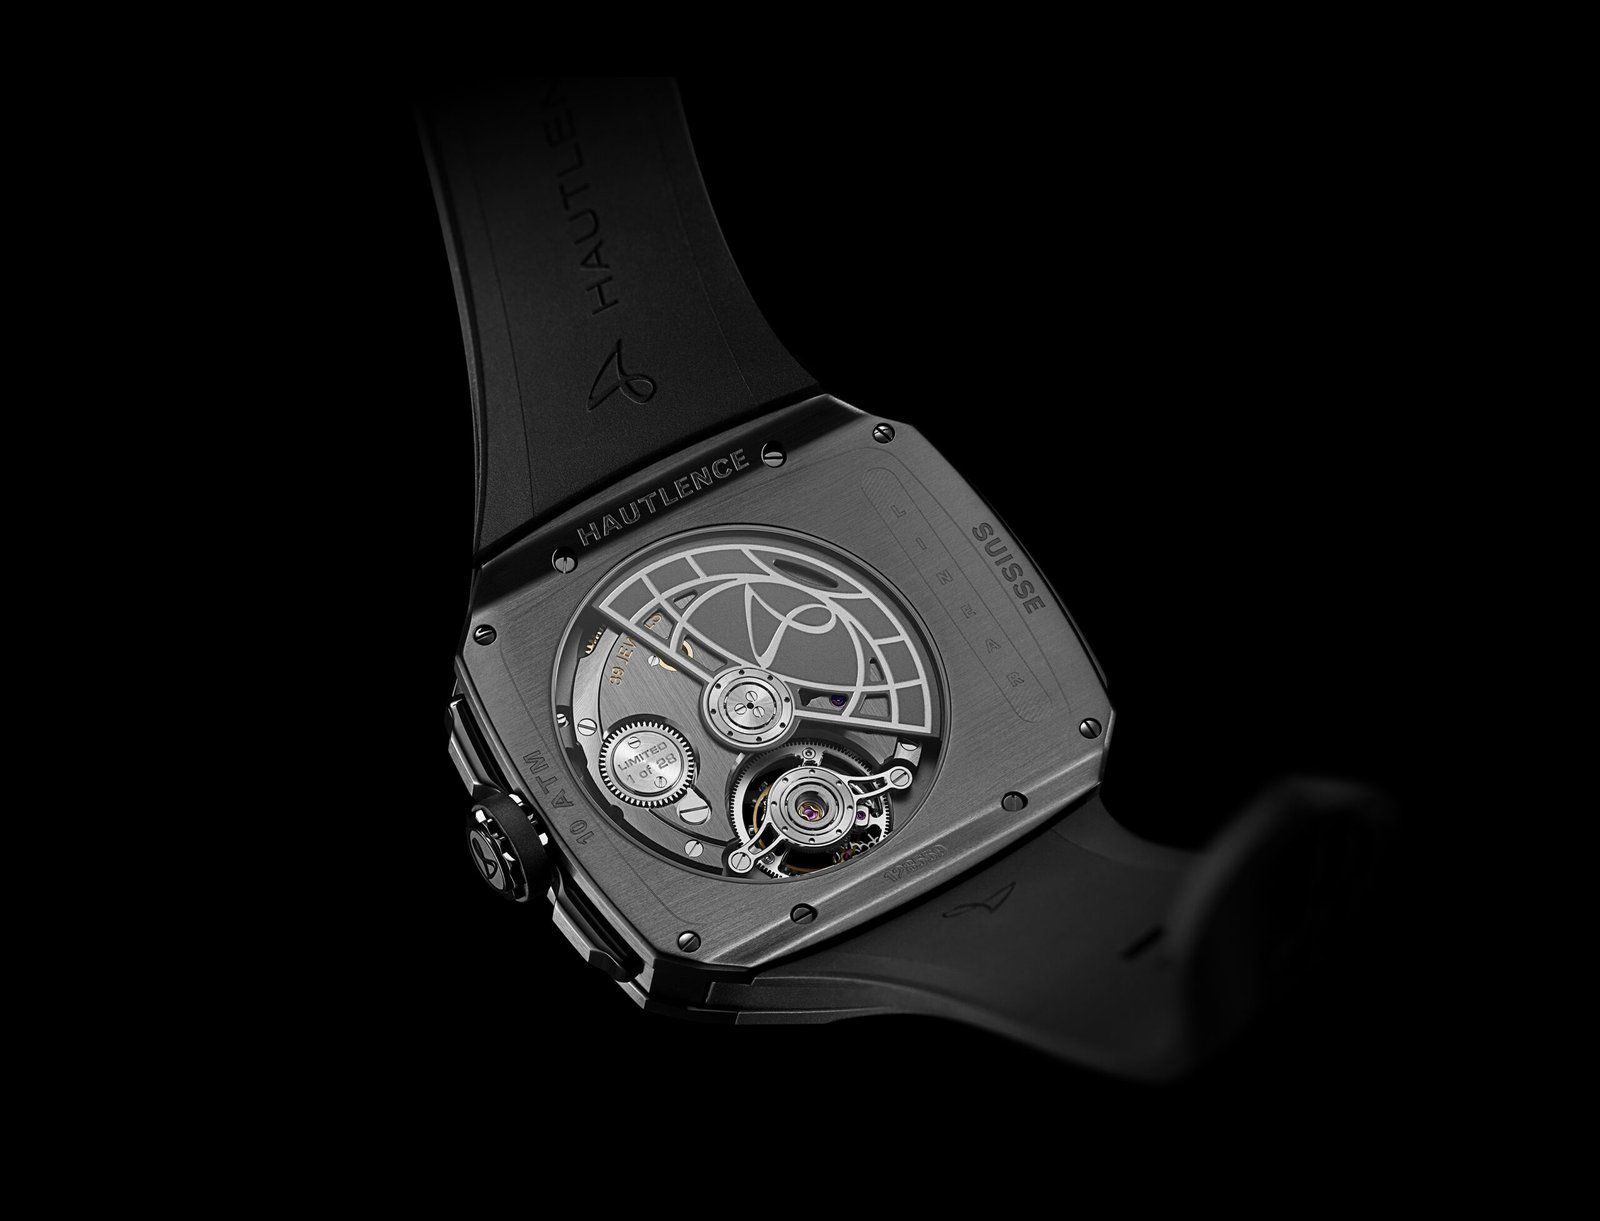 Hautlence Linear Series 2: Black Is The New Black?